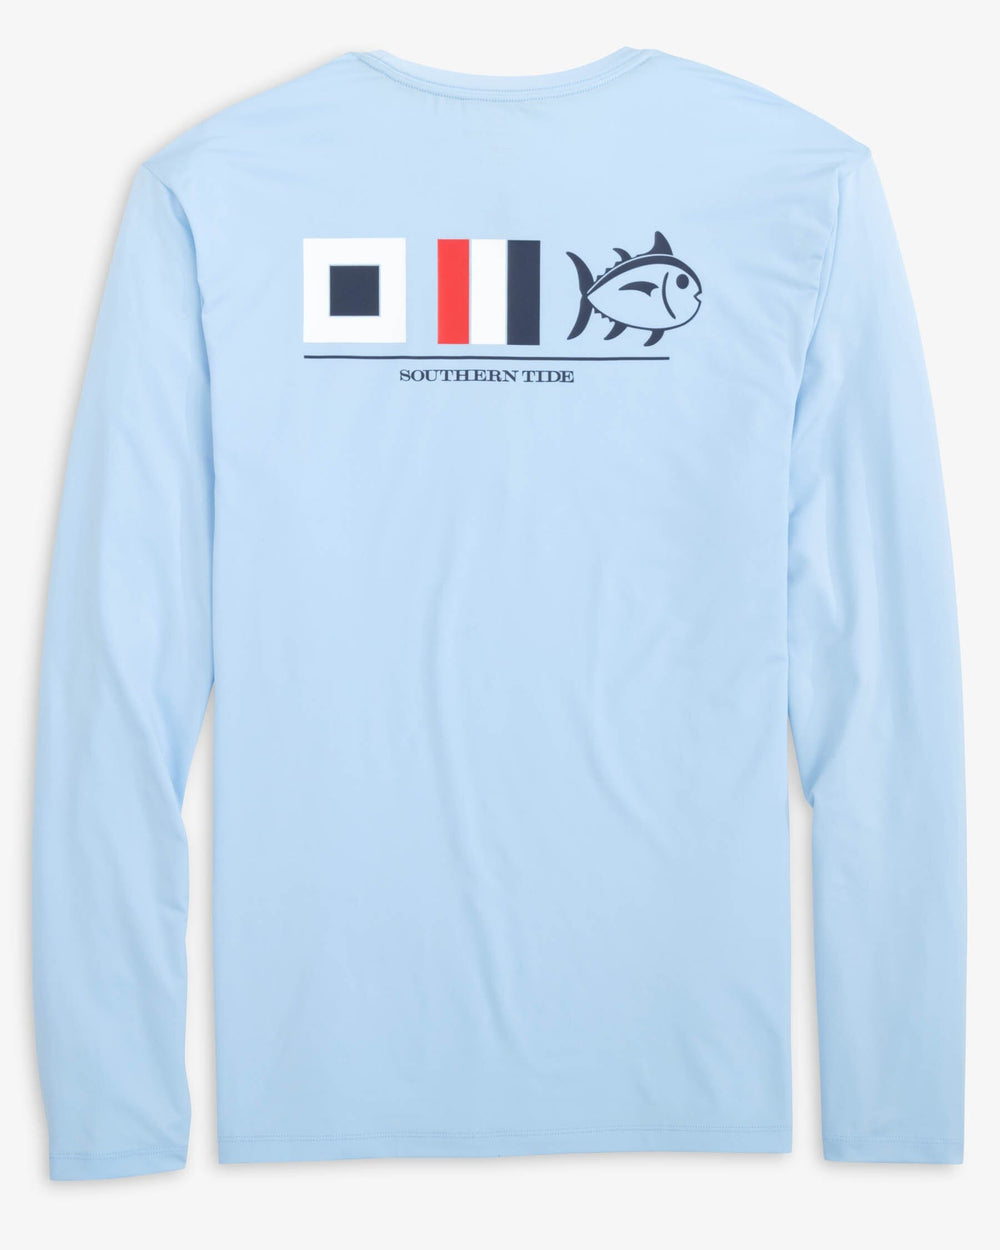 The back view of the Southern Tide Nautical Skipjack Long Sleeve Performance T-shirt by Southern Tide - Clearwater Blue